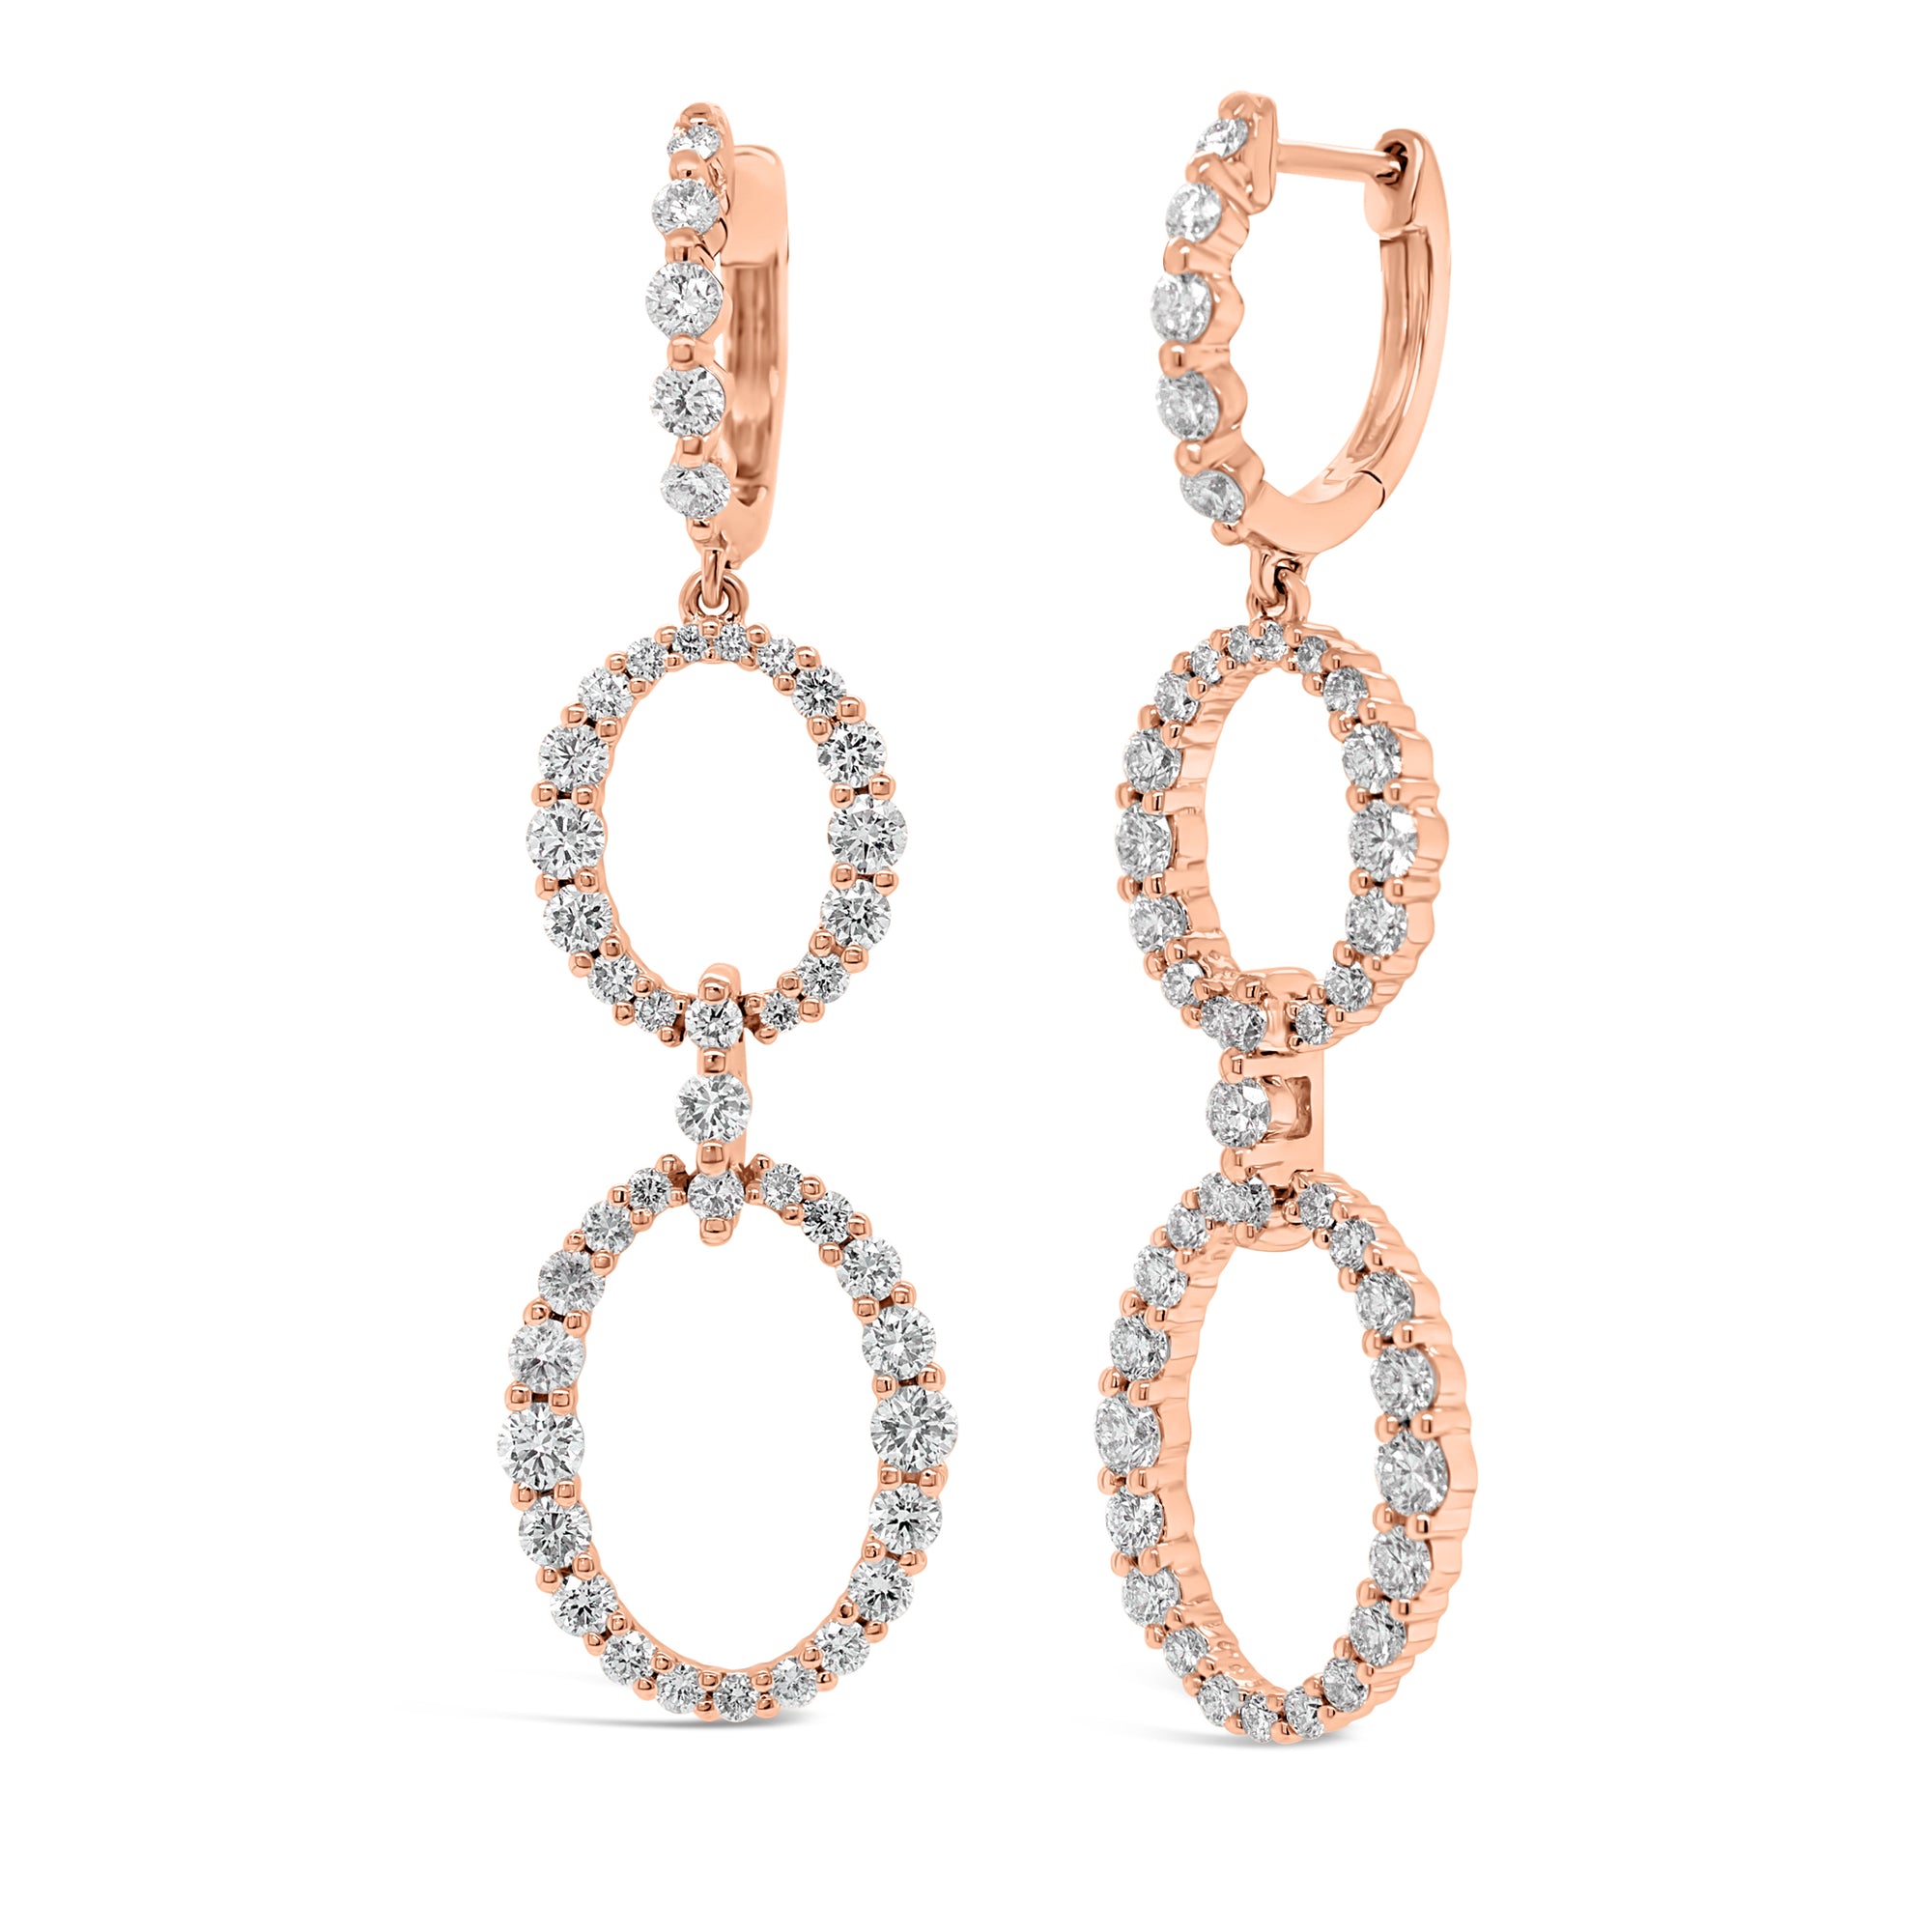 Prong-Set Diamond Oval Dangle Earrings  - 18K gold weighing 5.63 grams  - 86 round diamonds totaling 1.84 carats